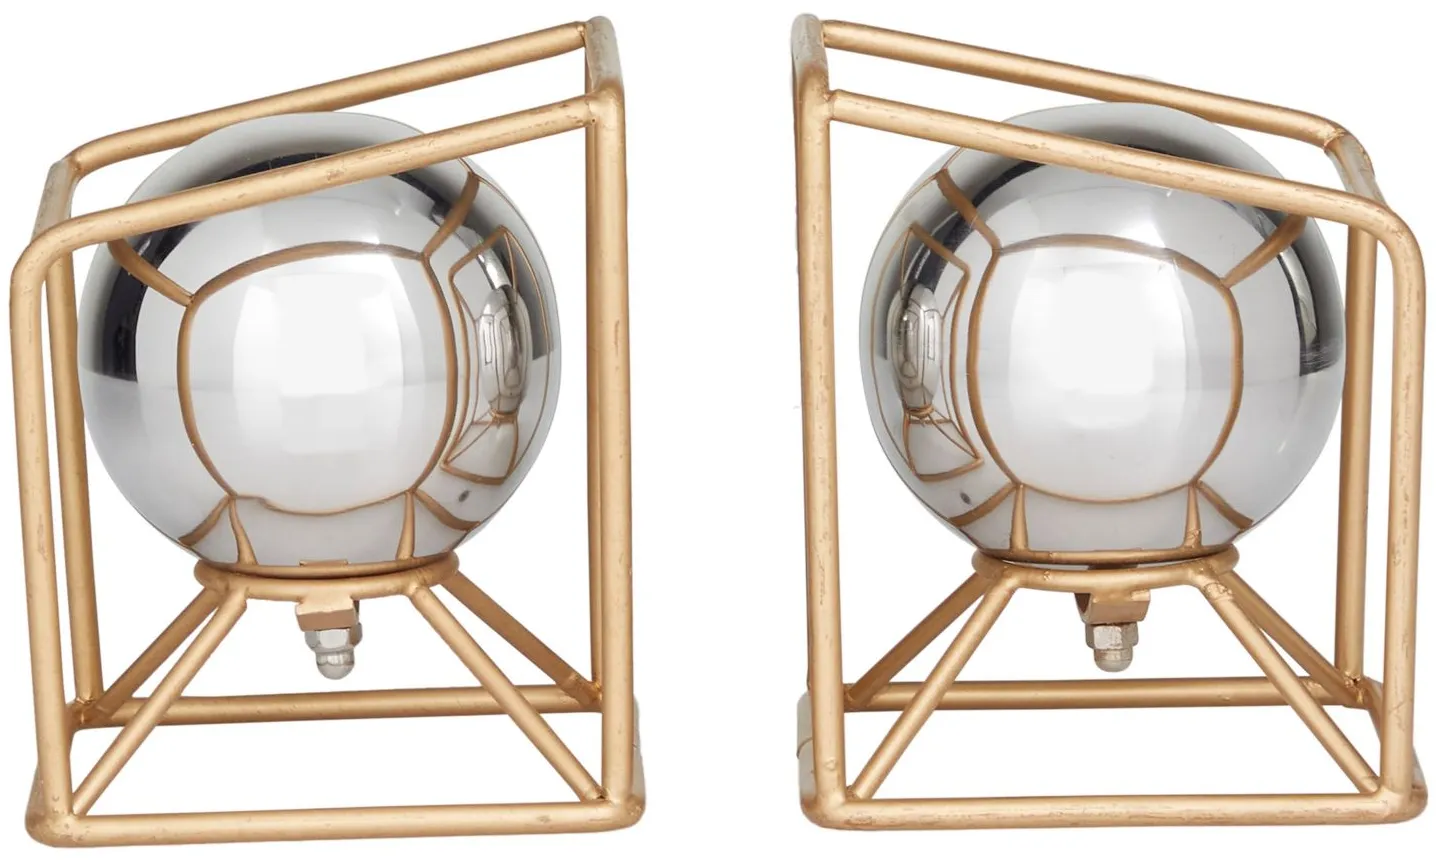 Ivy Collection Orb Geometric Bookends Set in Silver by UMA Enterprises